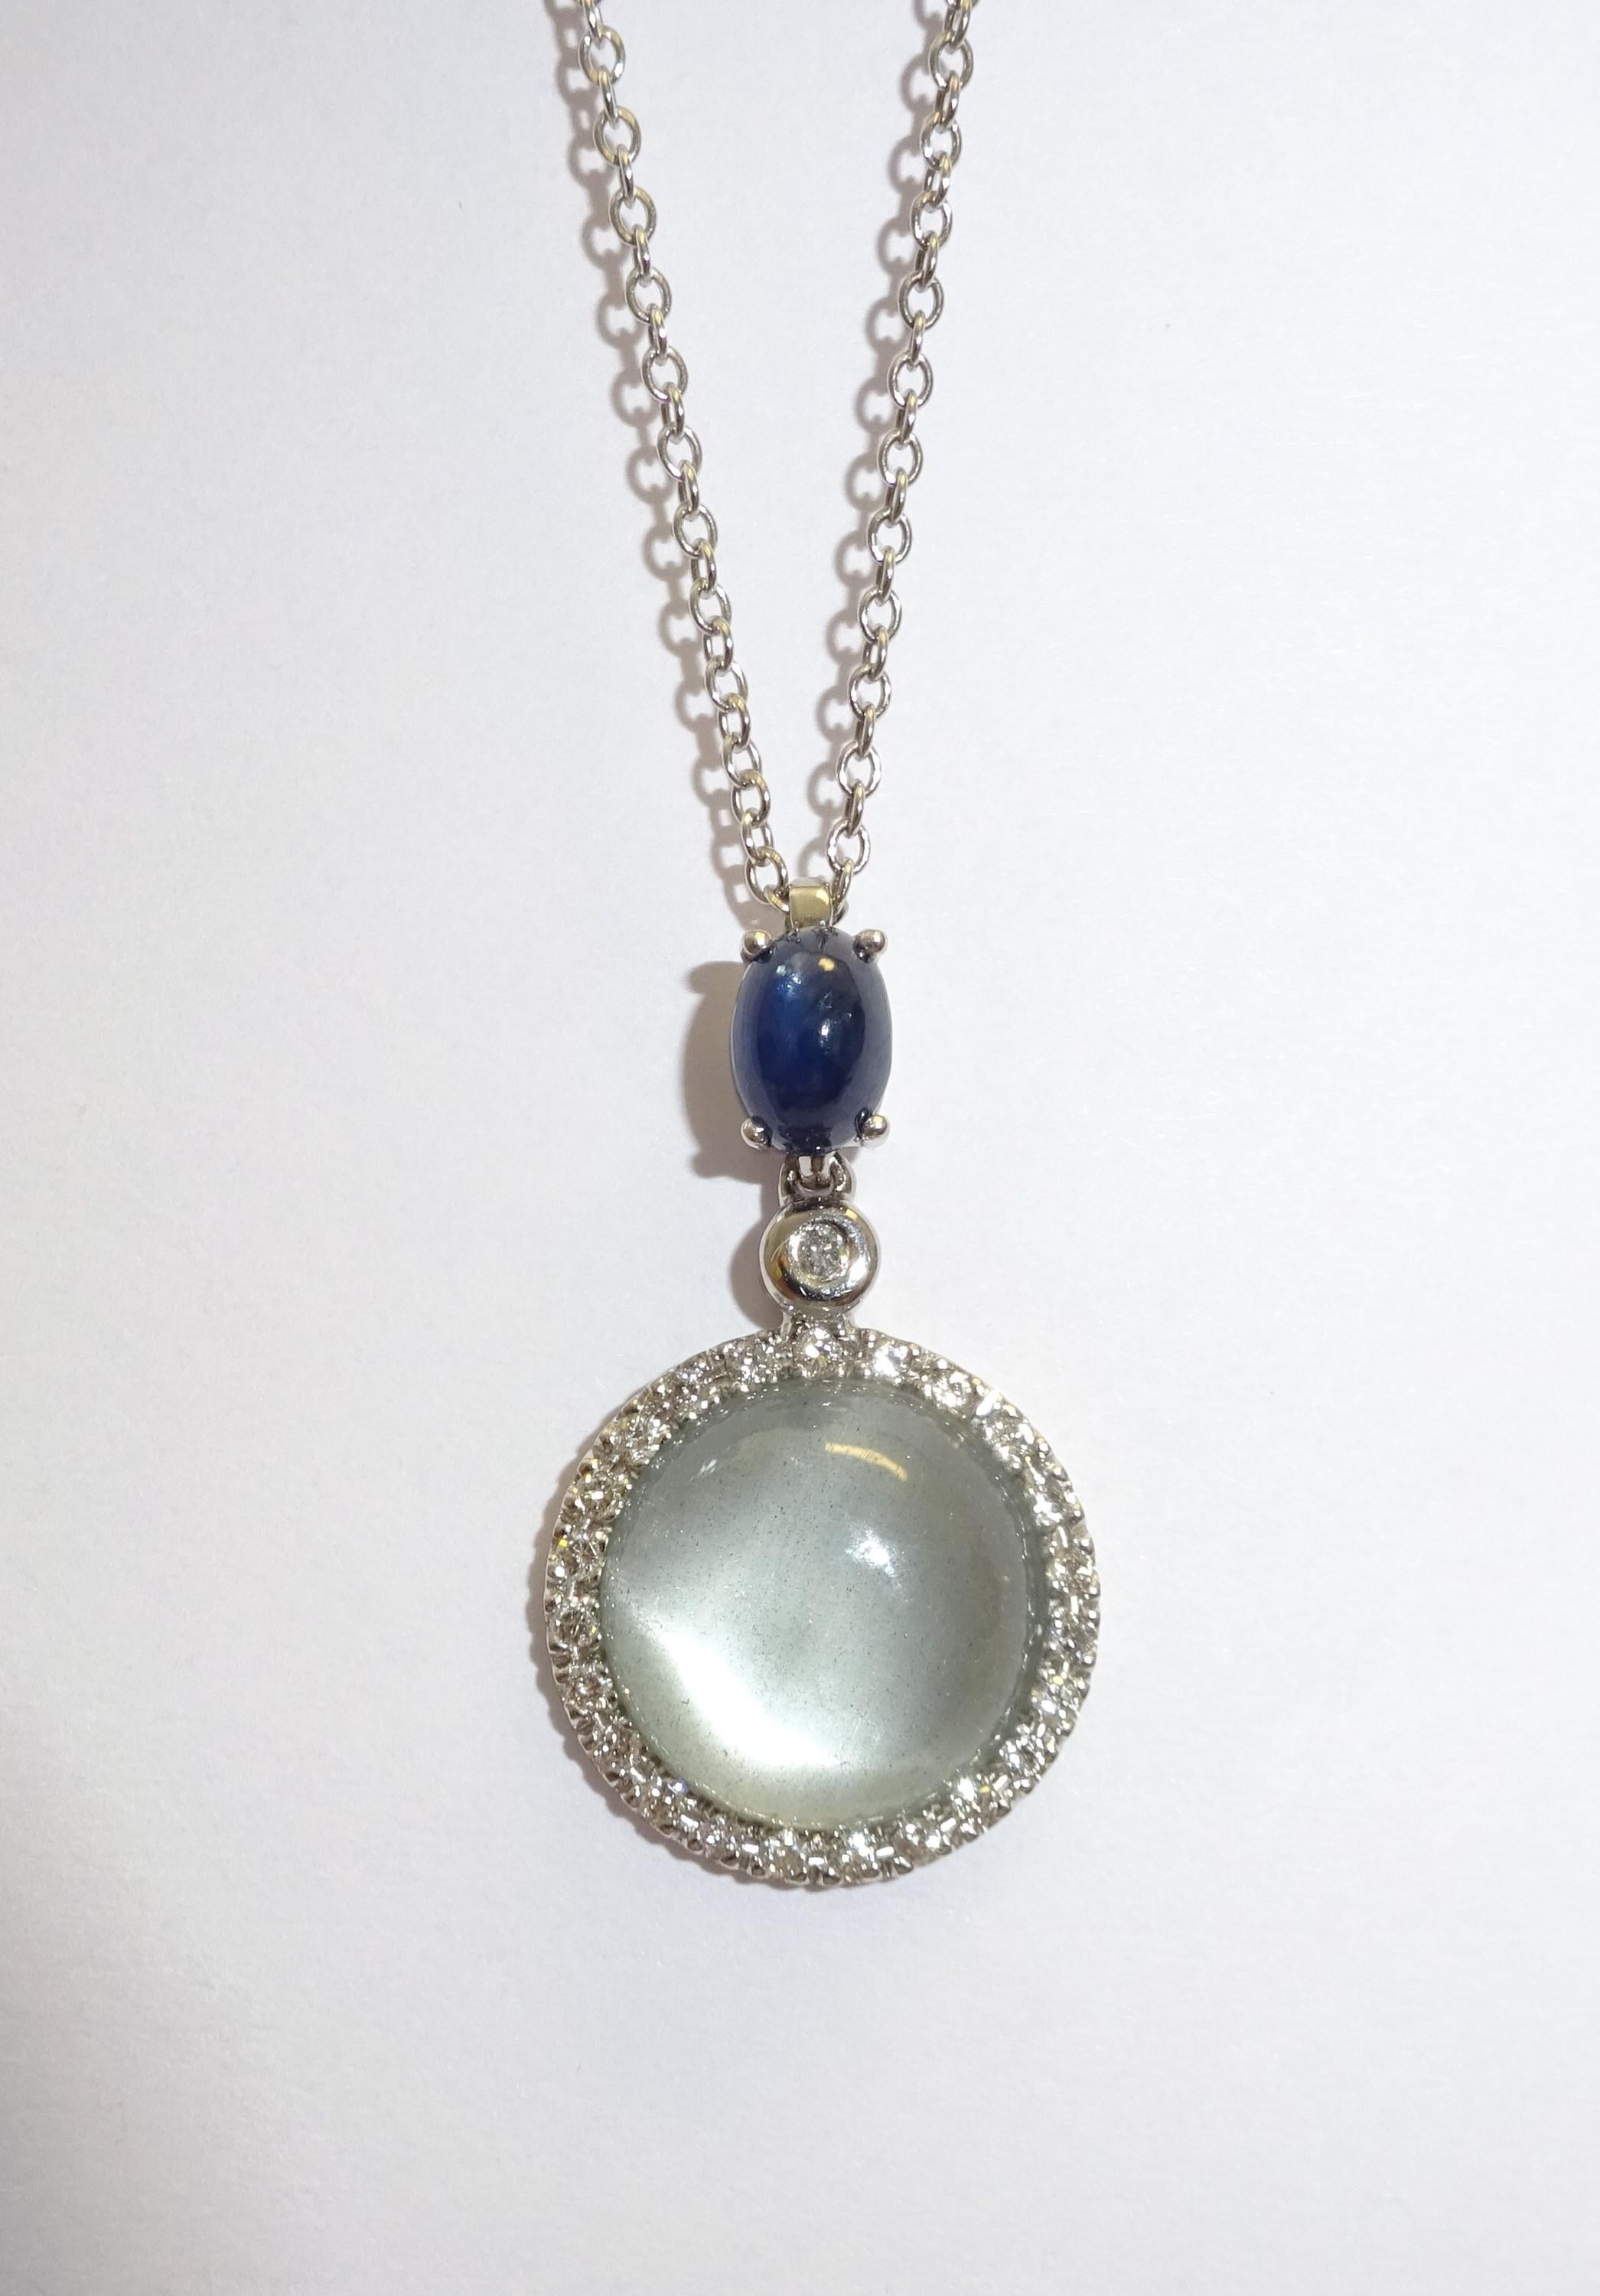 18 Karat White Gold  Diamonds , Sapphire and Aquamarine Pendant Neclas

24 Diamonds 0.30 ct.
1 Sapphire 0.99 ct
1 Aquamarine 4.90 ct.



Founded in 1974, Gianni Lazzaro is a family-owned jewelery company based out of Düsseldorf, Germany.
Although